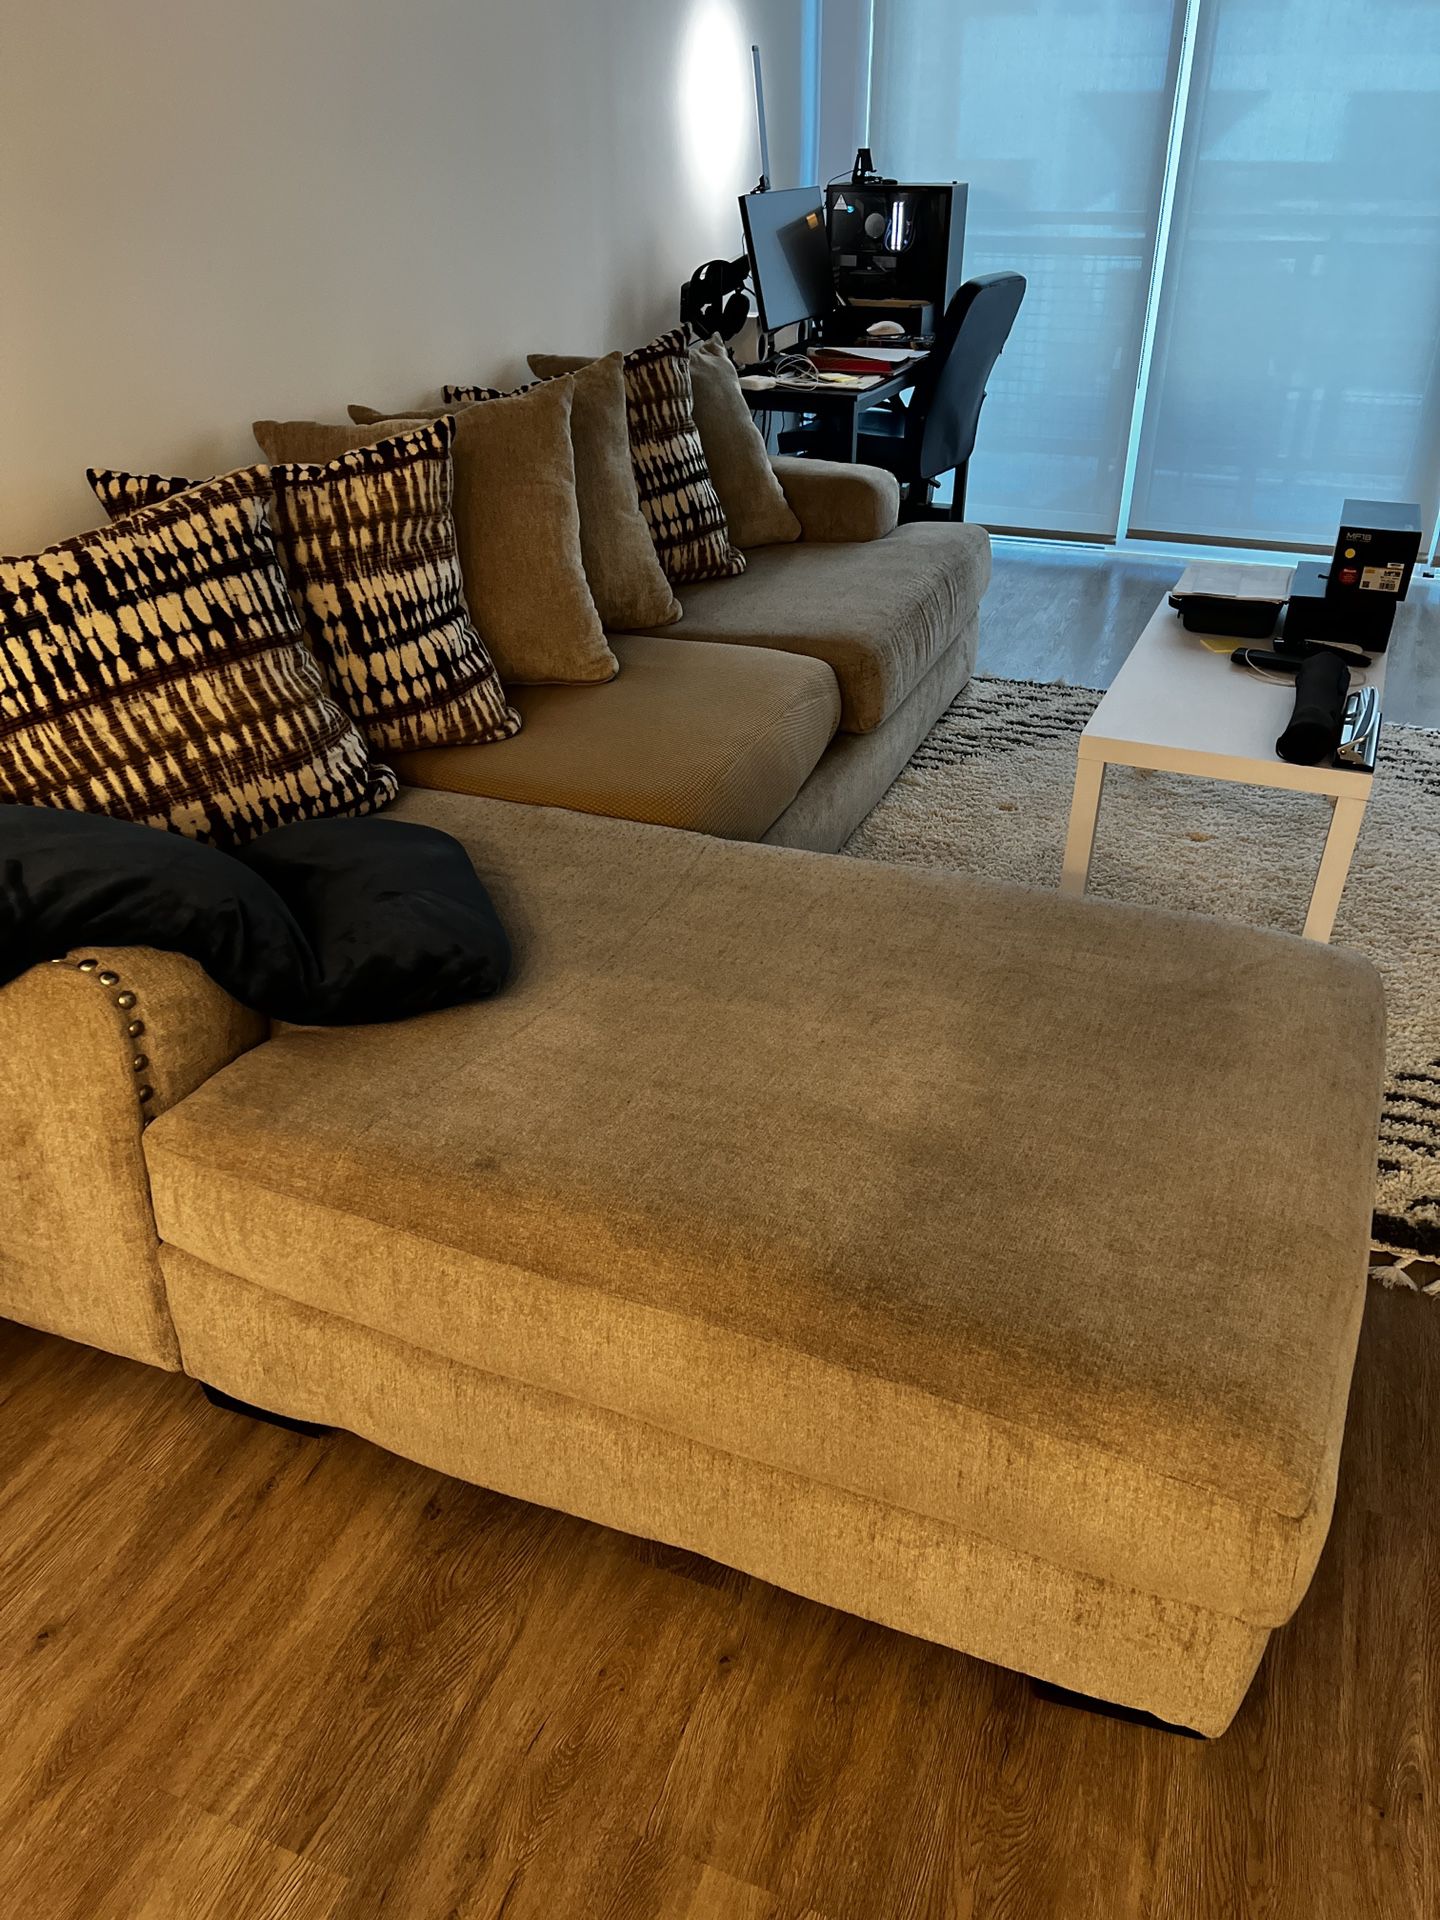 L-COUCH in Beige Color 